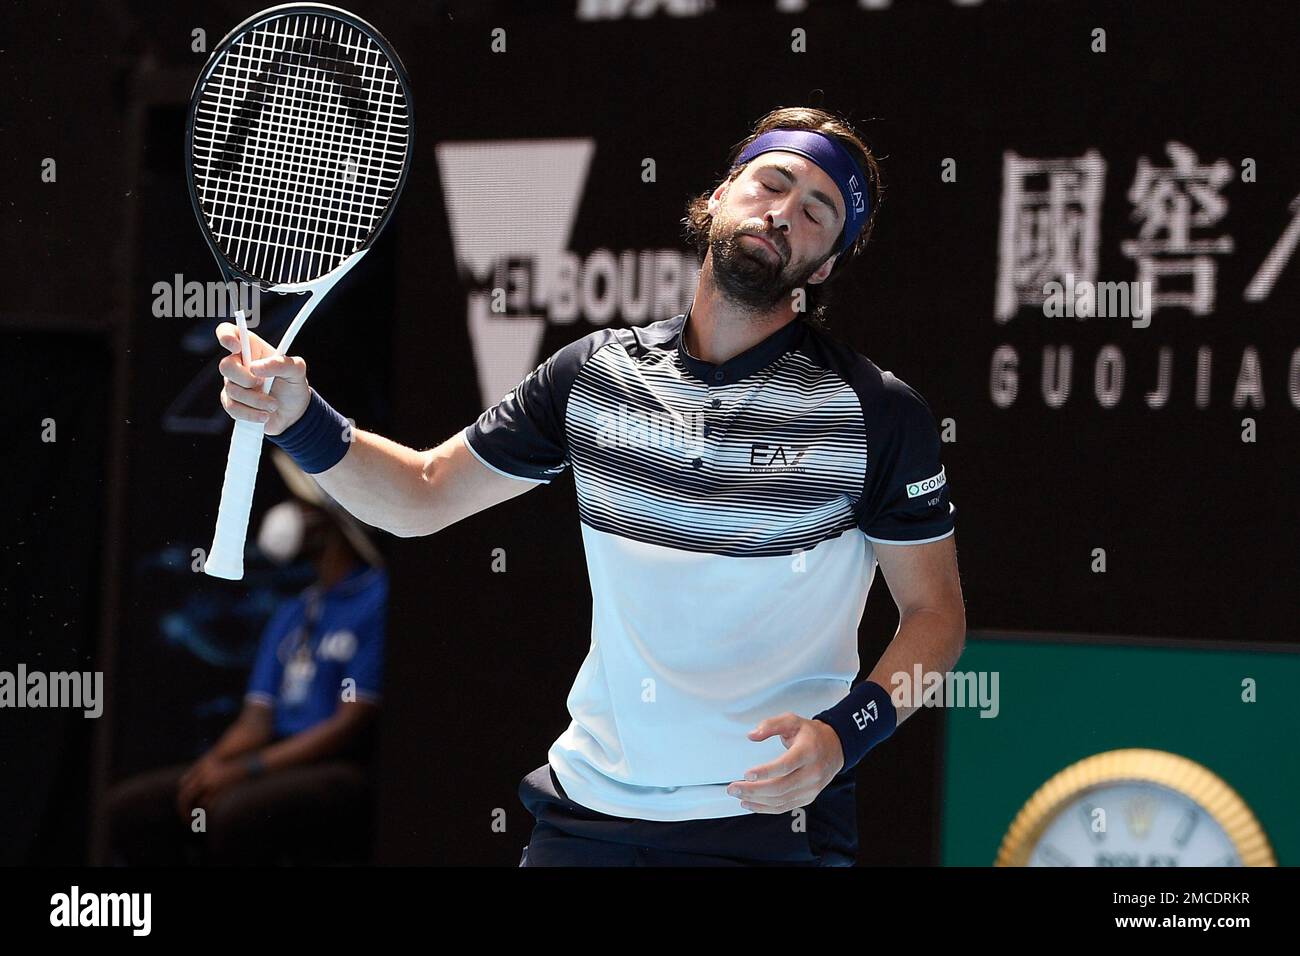 Nikoloz Basilashvili of Georgia reacts during his first round match against Andy Murray of Britain at the Australian Open tennis championships in Melbourne, Australia, Tuesday, Jan